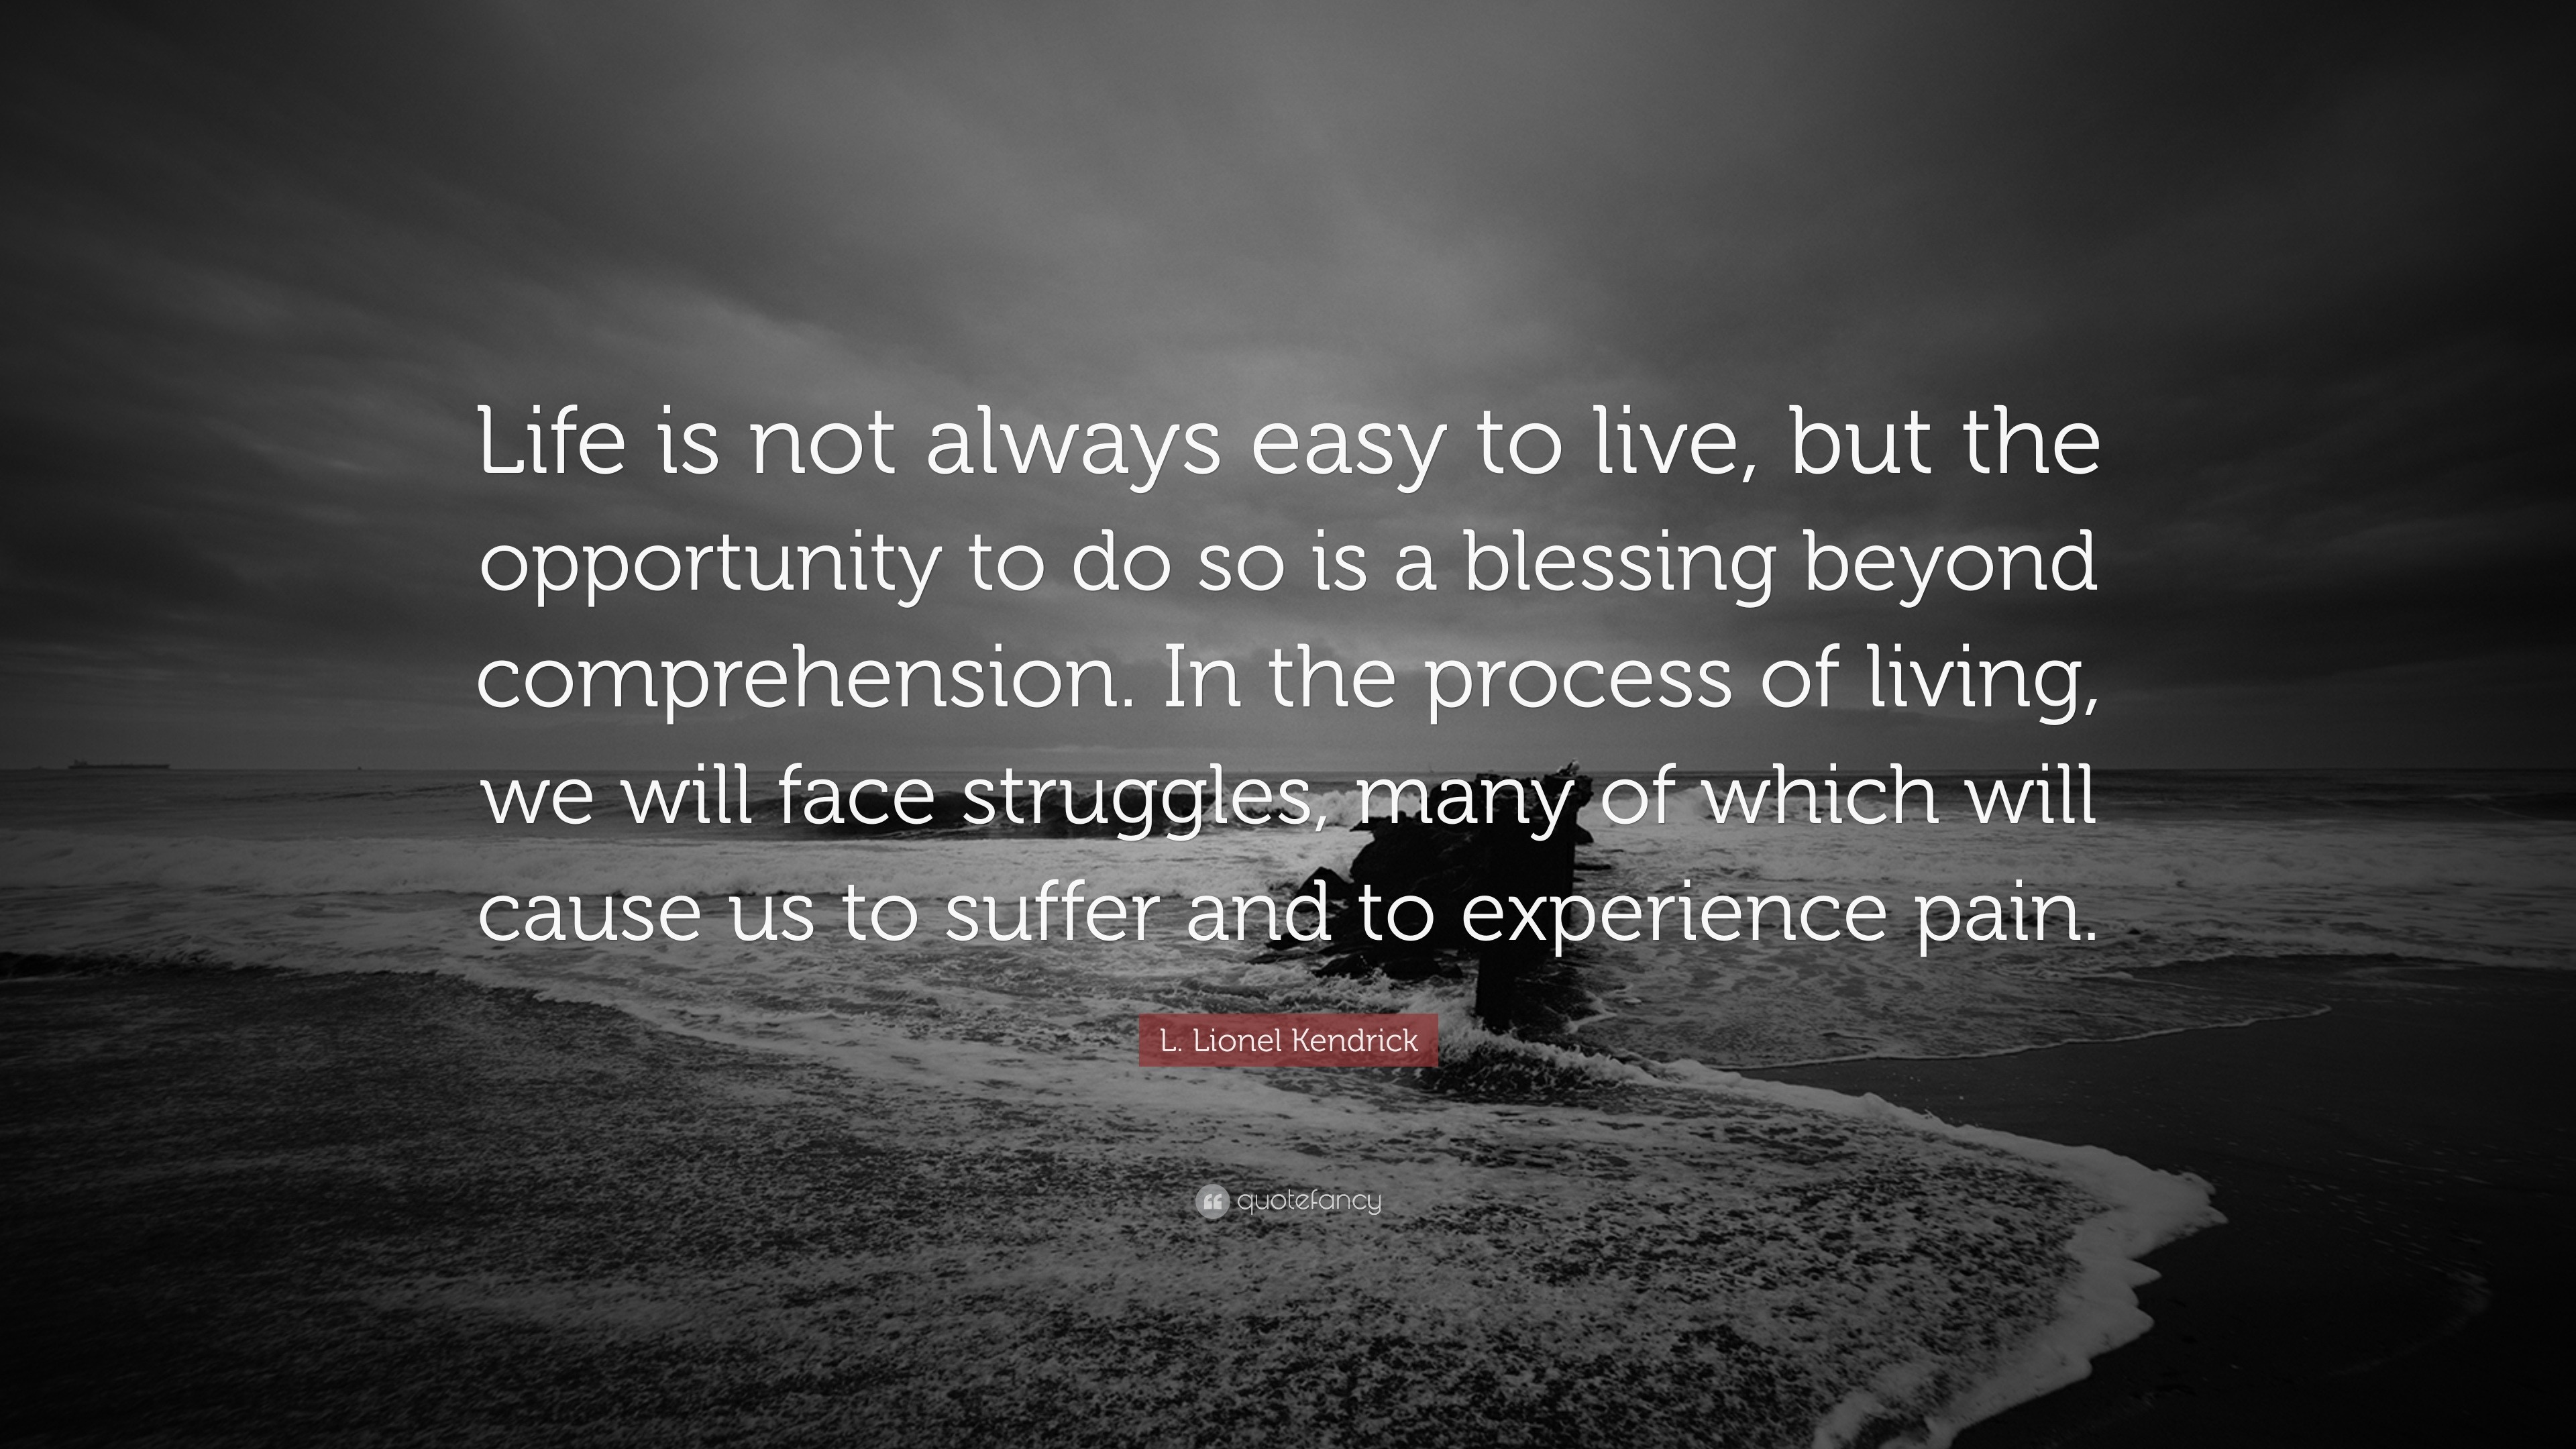 L. Lionel Kendrick Quote: “Life Is Not Always Easy To Live, But The Opportunity To Do So Is A Blessing Beyond Comprehension. In The Process Of Livi...”